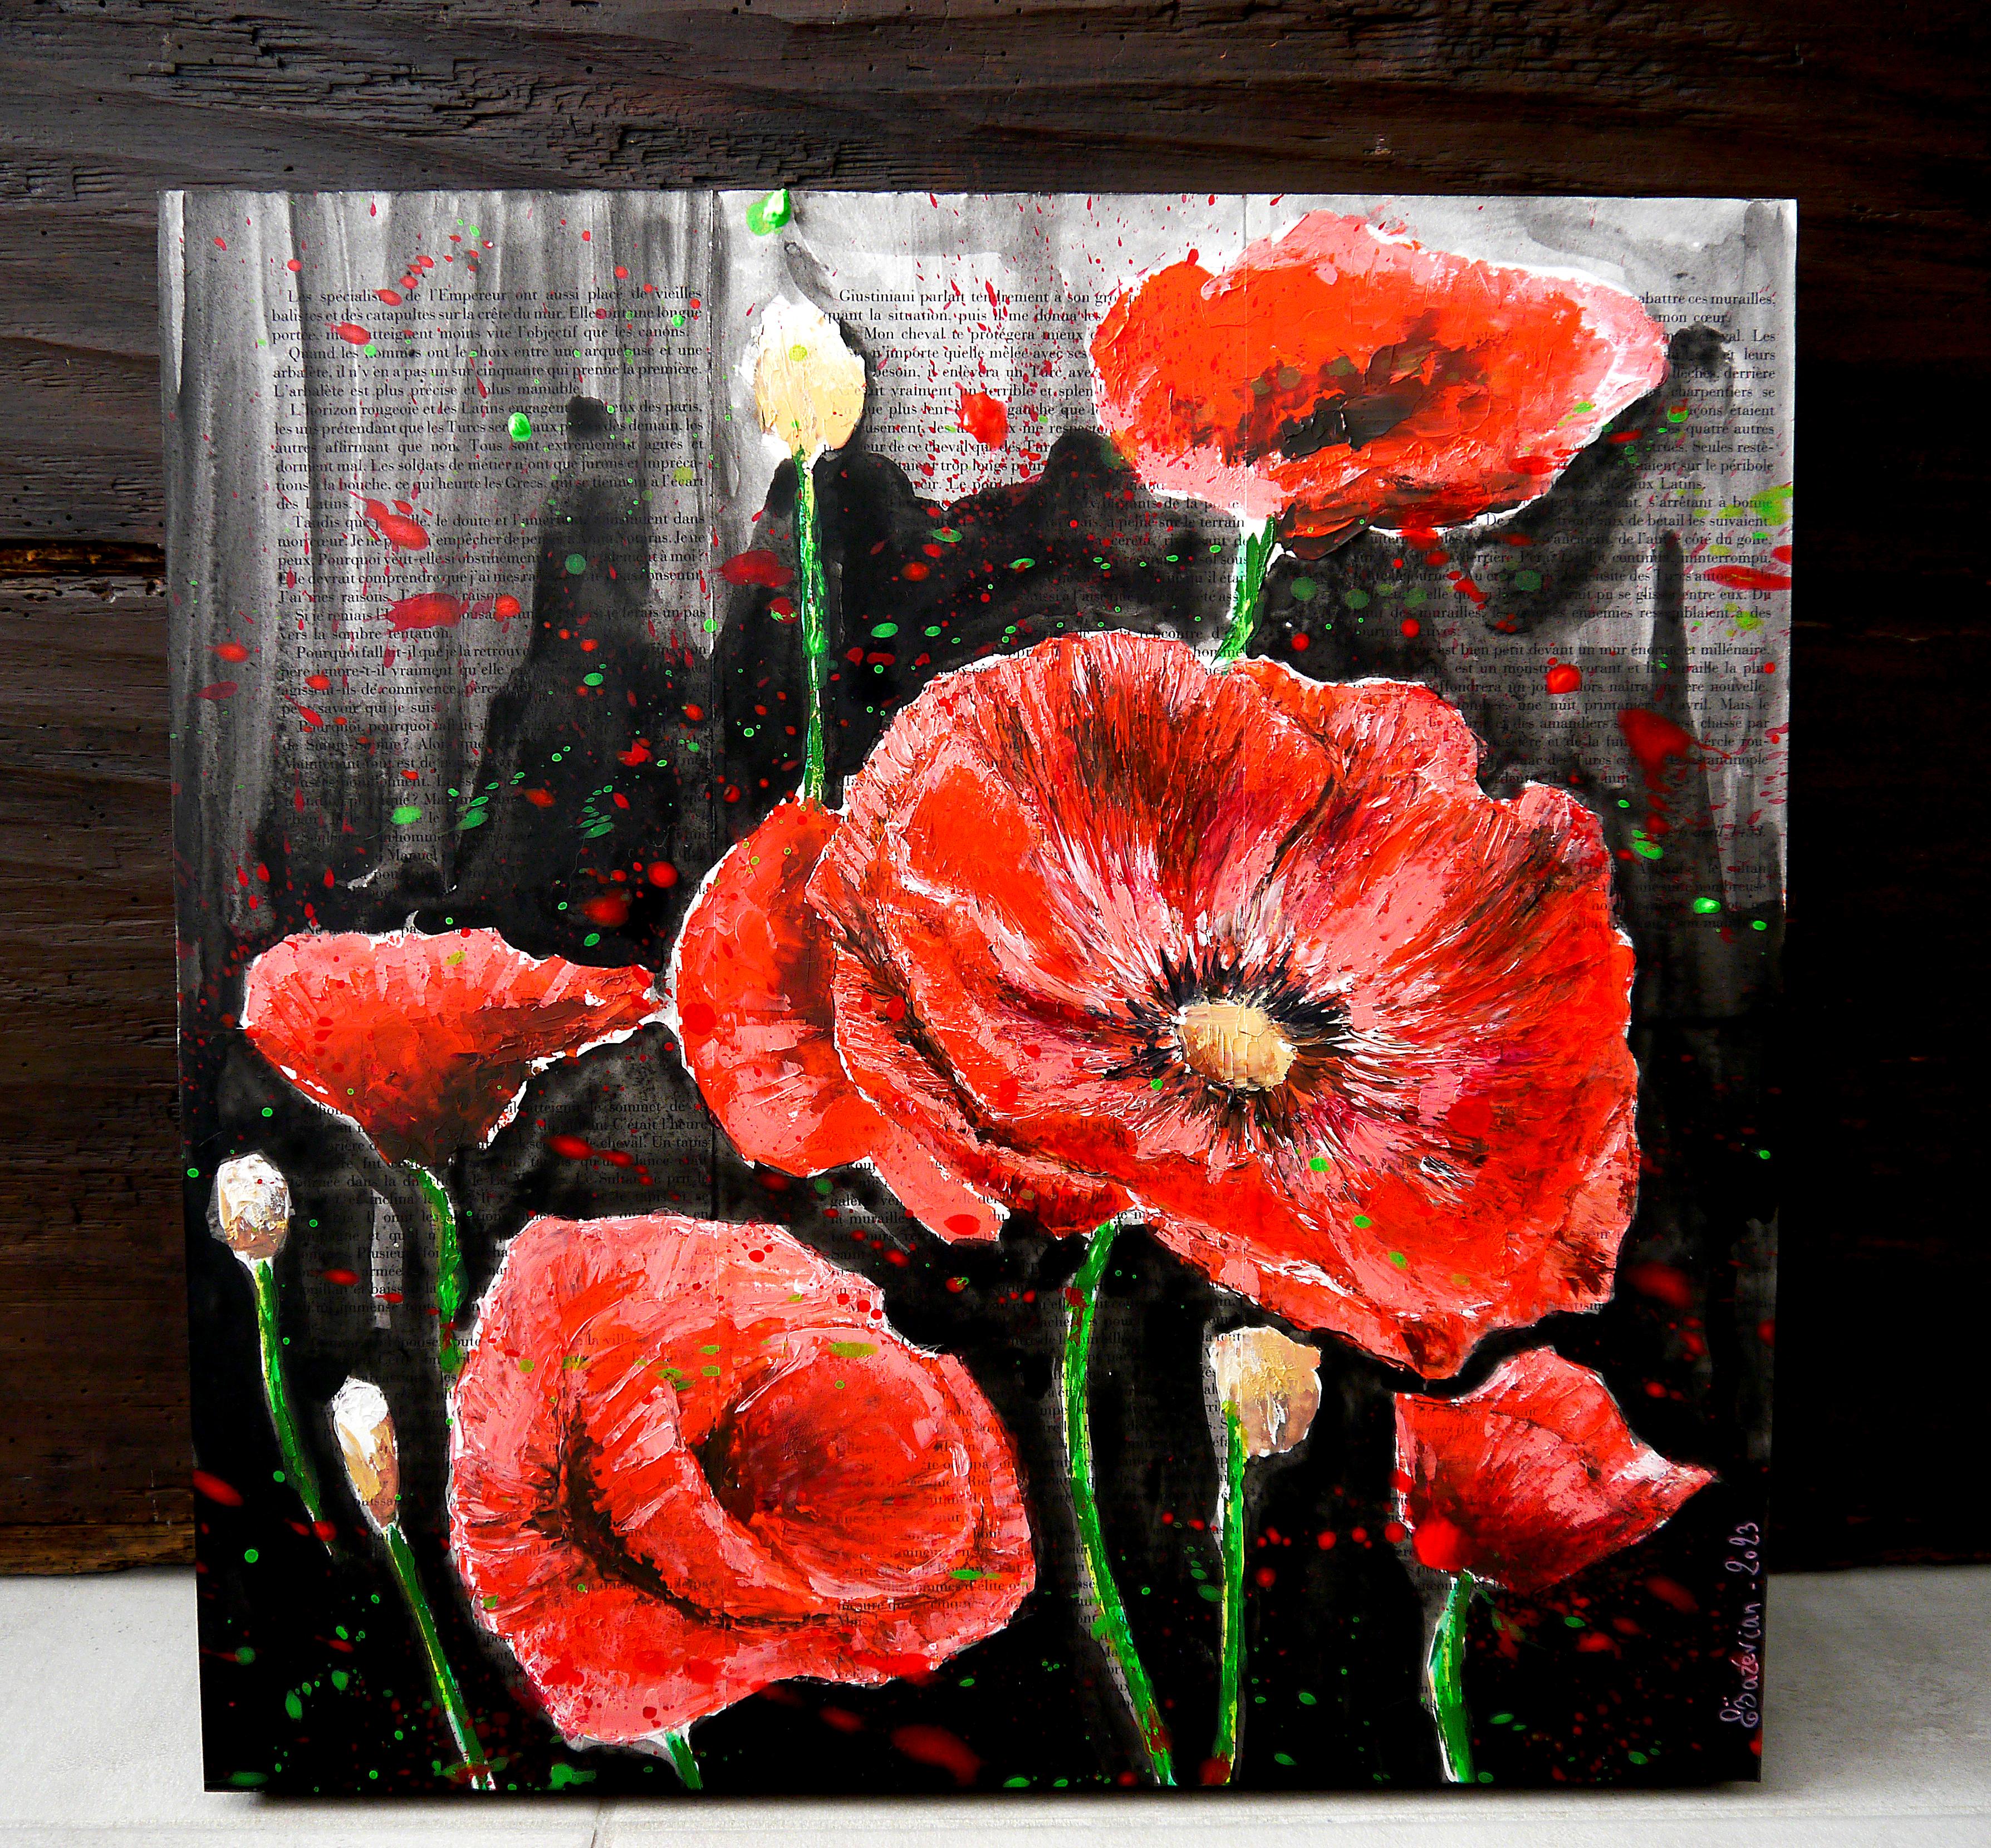 Poppy Starwars

Structural analysis:
_ Feeling of the wind in the flowers_   Abstract drippings bring movement to the still life painting. There are 2 systems of contrasts. First one, a classic contrast between dark and light colors. Second one, is